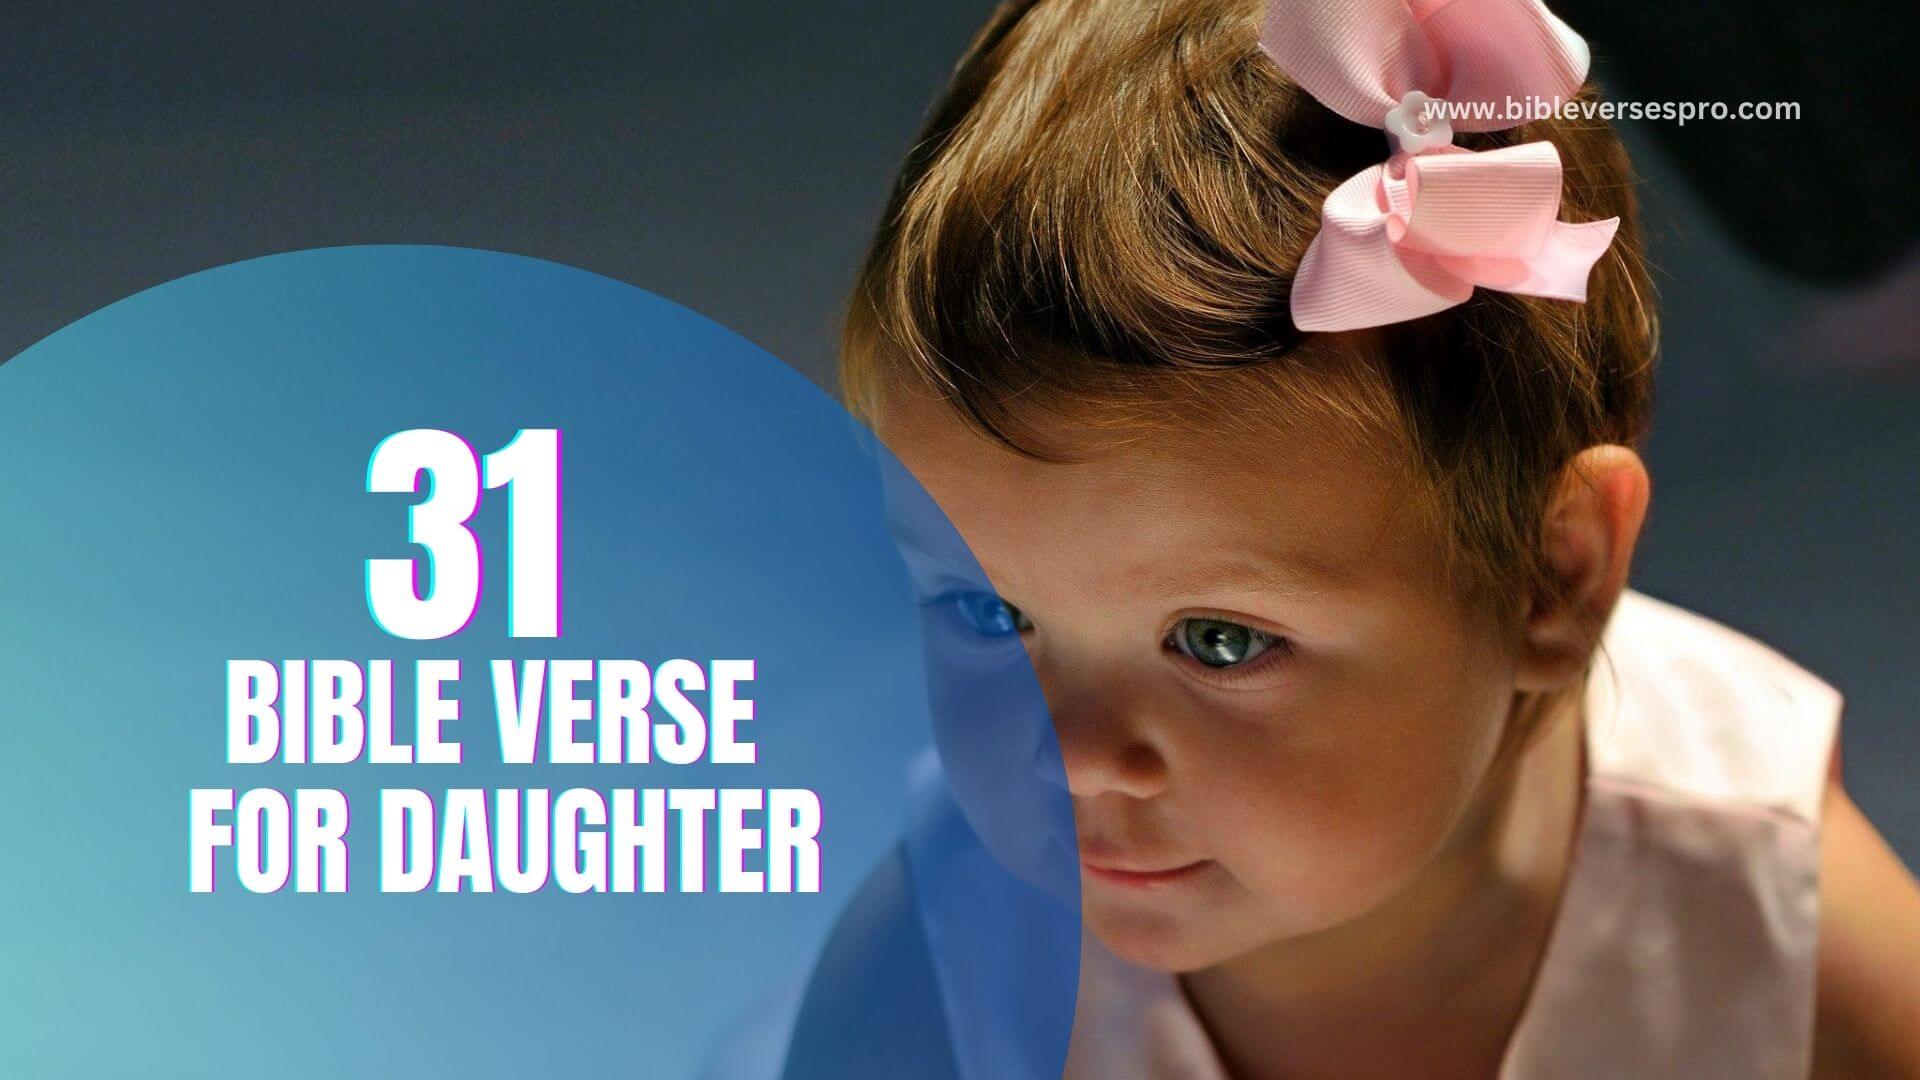 BIBLE VERSE FOR DAUGHTER (1)